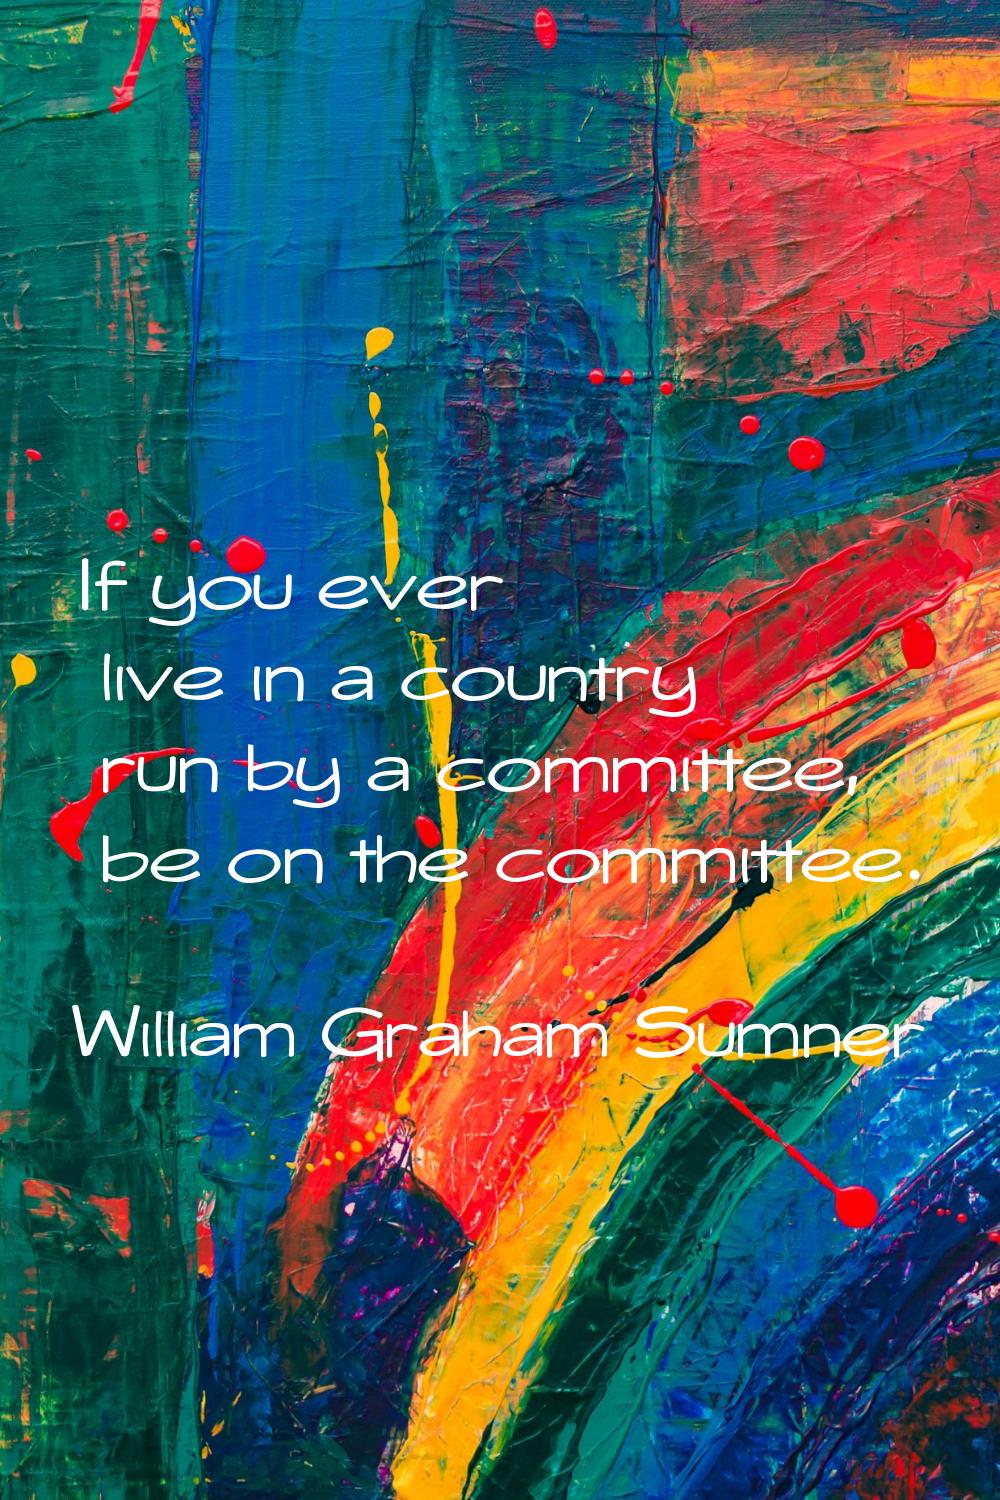 If you ever live in a country run by a committee, be on the committee.